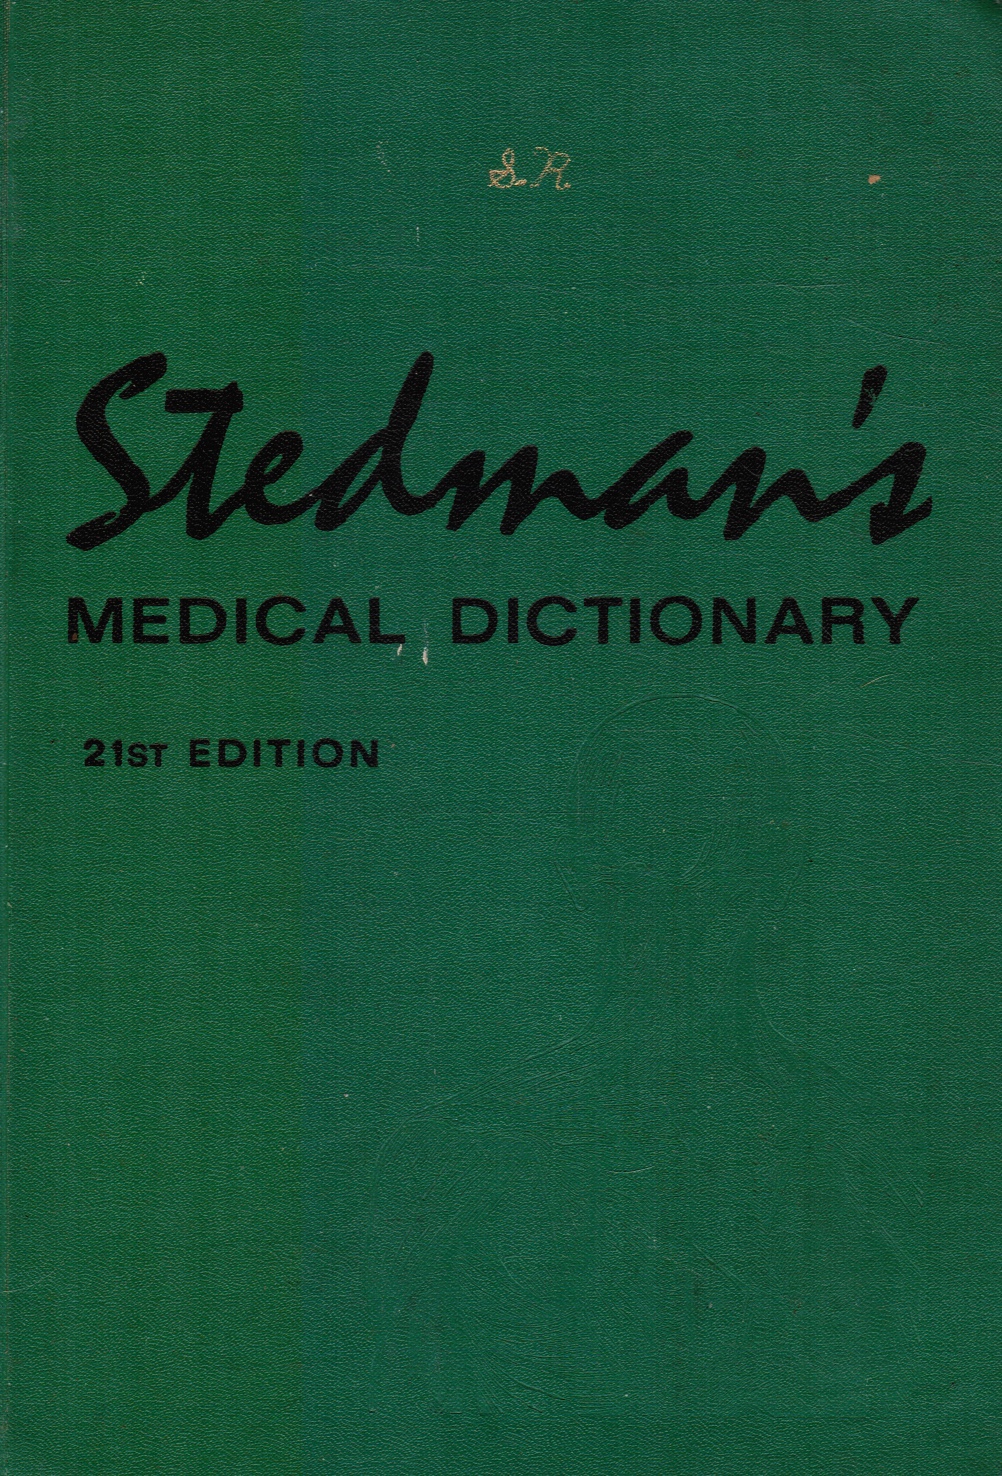 ASIMOV, ISAAC; DAVID BASSETT; PARKER BEAMER; WILLIAM B. BEAN, ET ALL (CONTRIBUTING EDITORS) - Stedman's Medical Dictionary : A Vocabulary of Medicine and Its Allied Sciences, with Pronunciations and Derivations